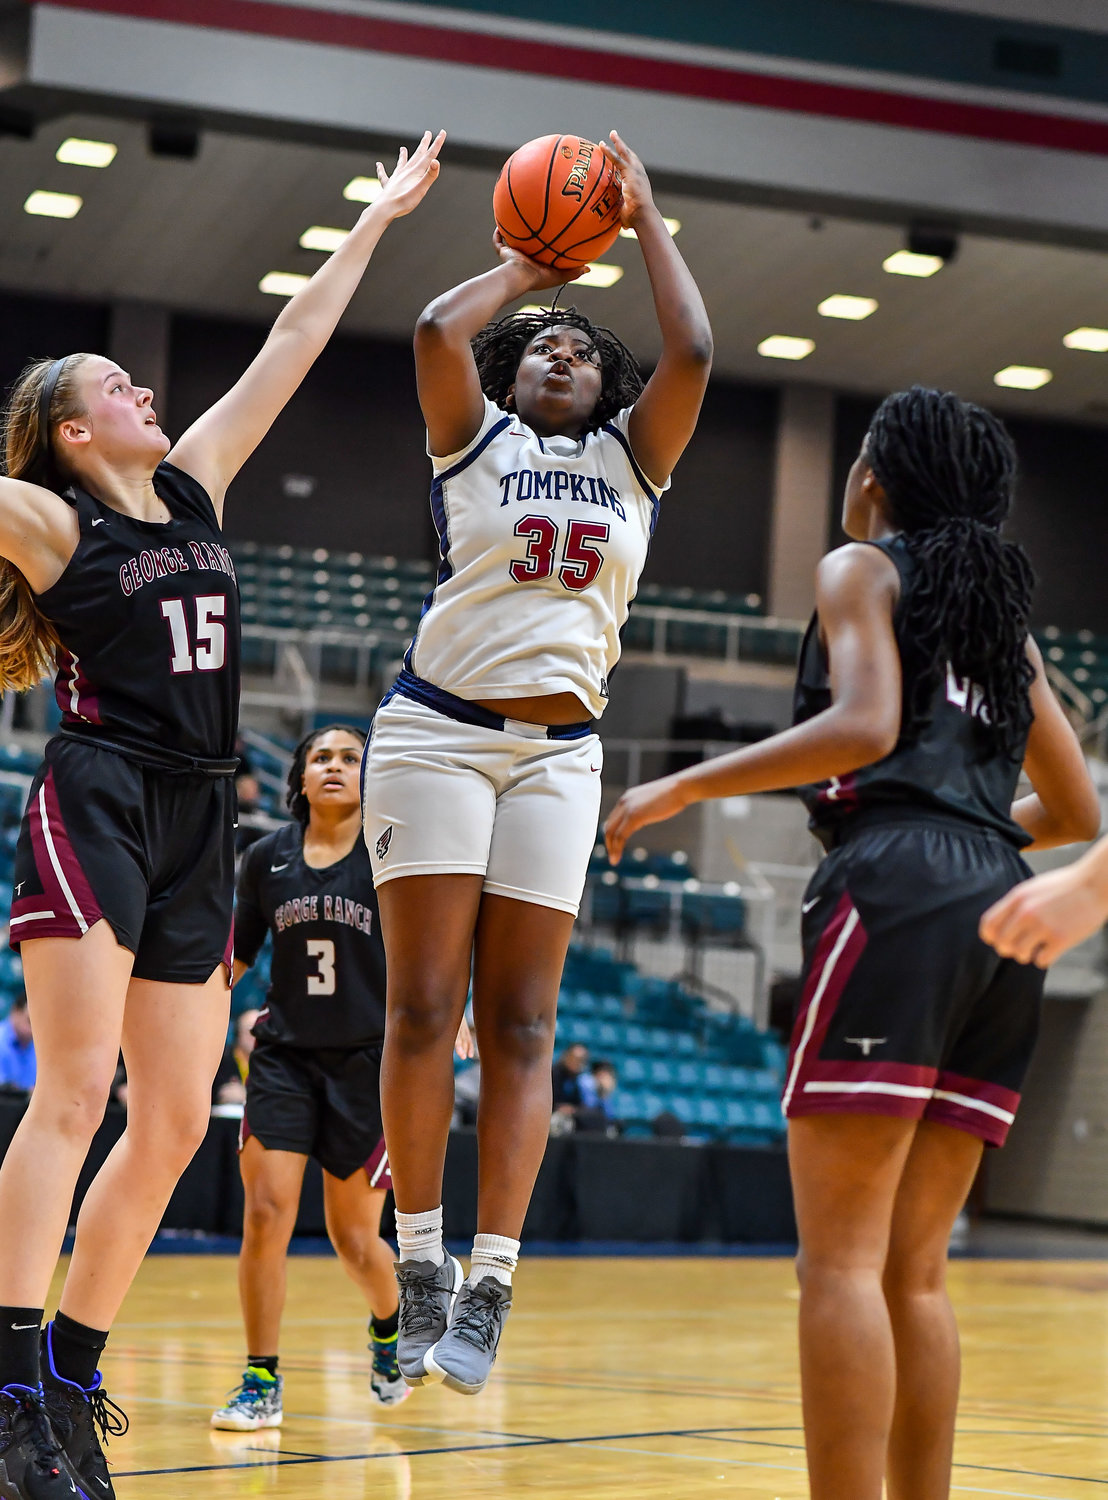 Katy Tx. Feb 15, 2022: Tompkins Fiyin Adeleye #35 goes up for the shot during the Bi-District playoff, Tompkins vs George Ranch. (Photo by Mark Goodman / Katy Times)